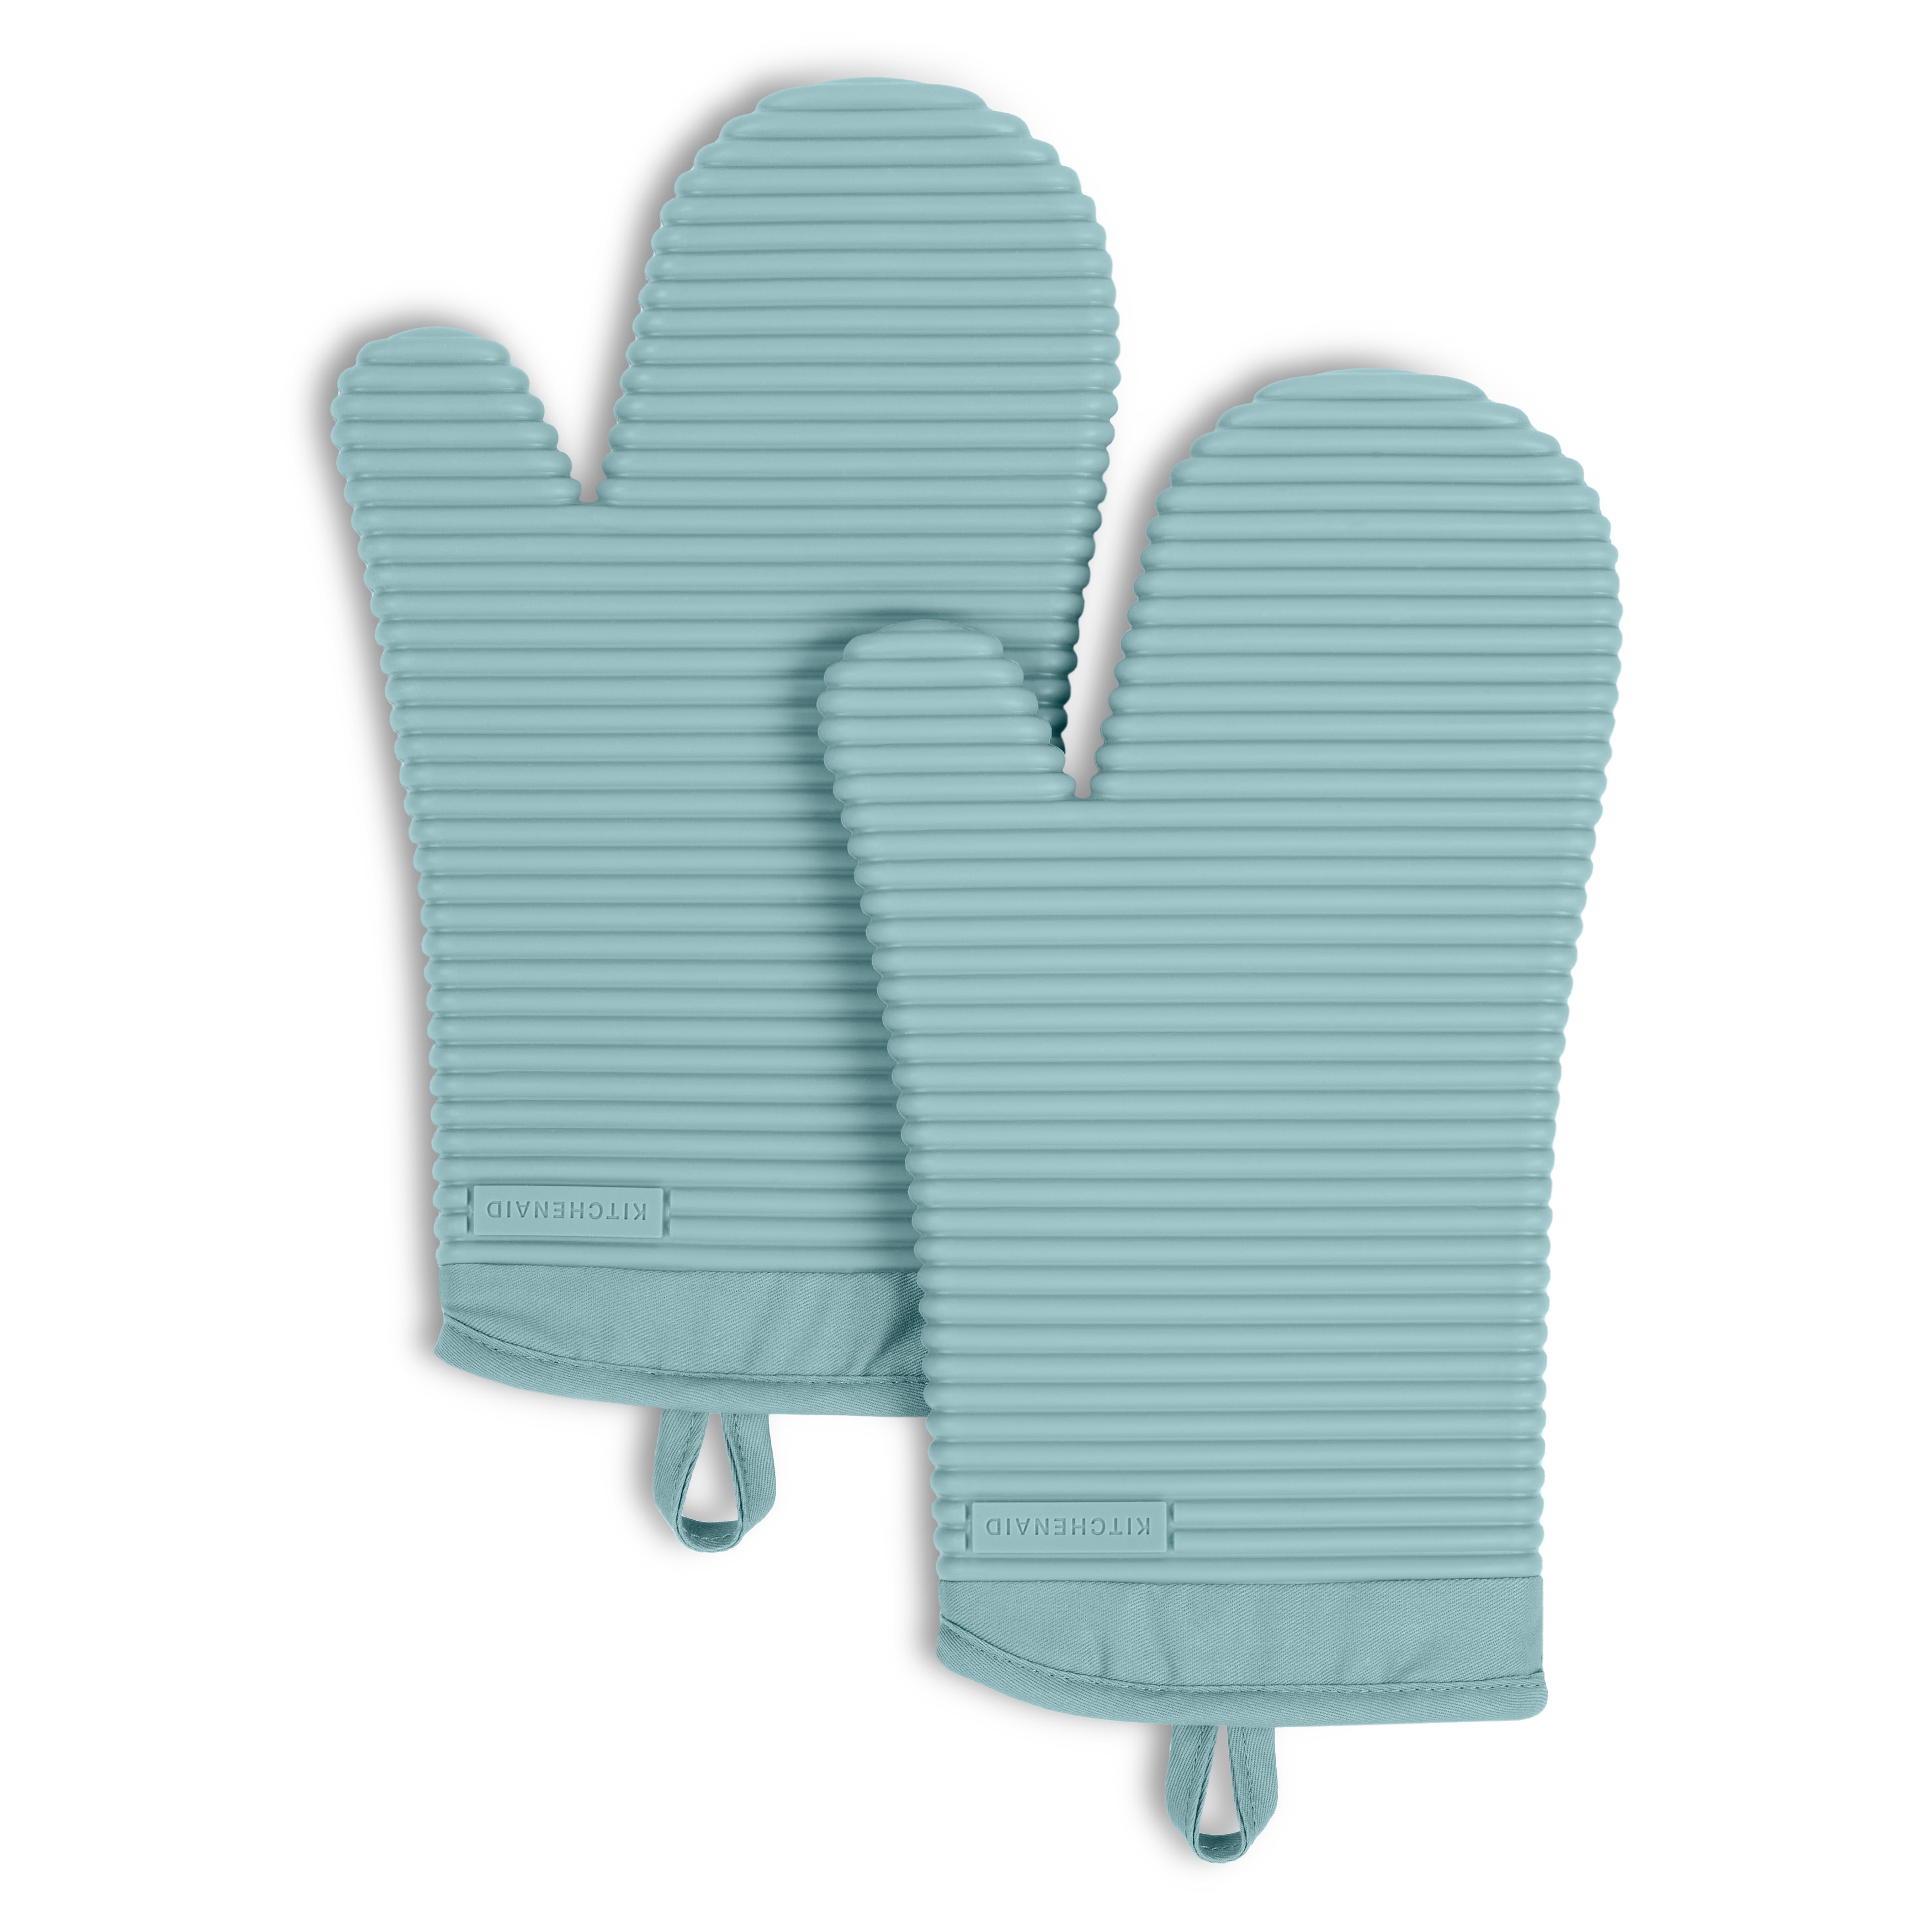 https://ak1.ostkcdn.com/images/products/is/images/direct/5f4d39892853a85ae66891e8950ca8a8dc0fa3d2/KitchenAid-Ribbed-Soft-Silicone-Oven-Mitt-2-Pack-Set%2C-7.5%22x13%22.jpg